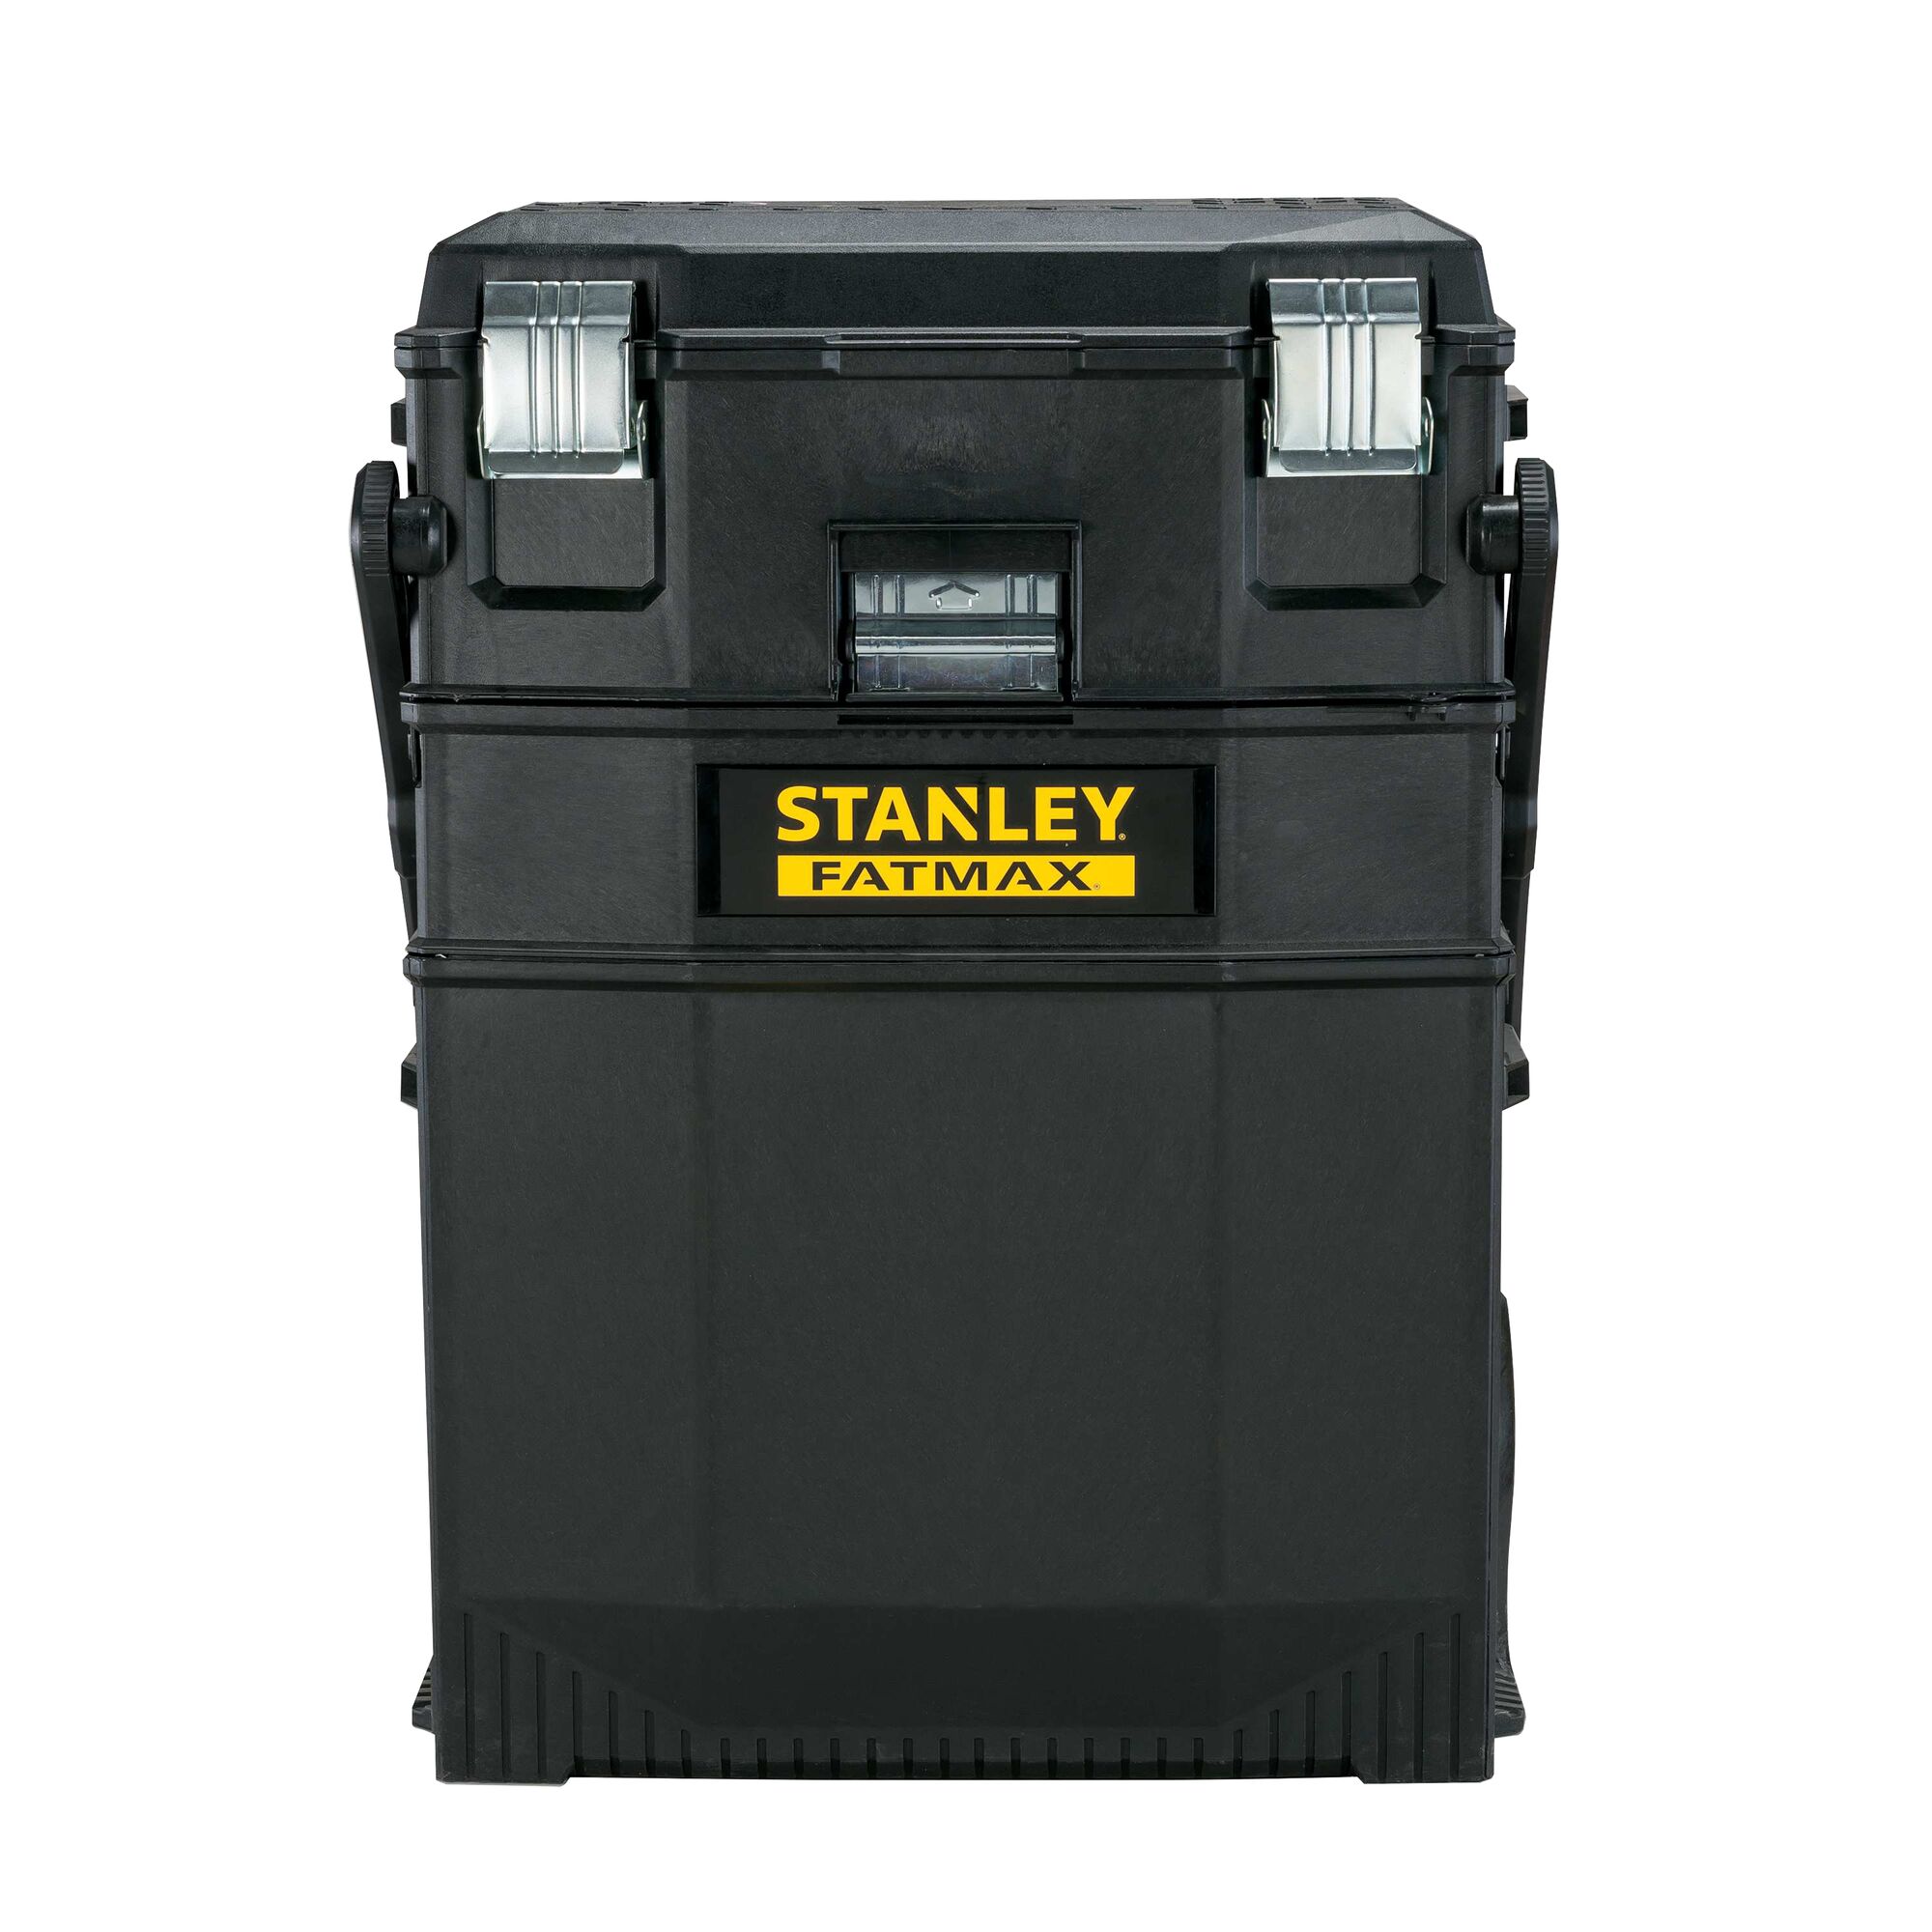 Stanley FATMAX 4-in-1 Mobile Work Station S020800R for sale online 